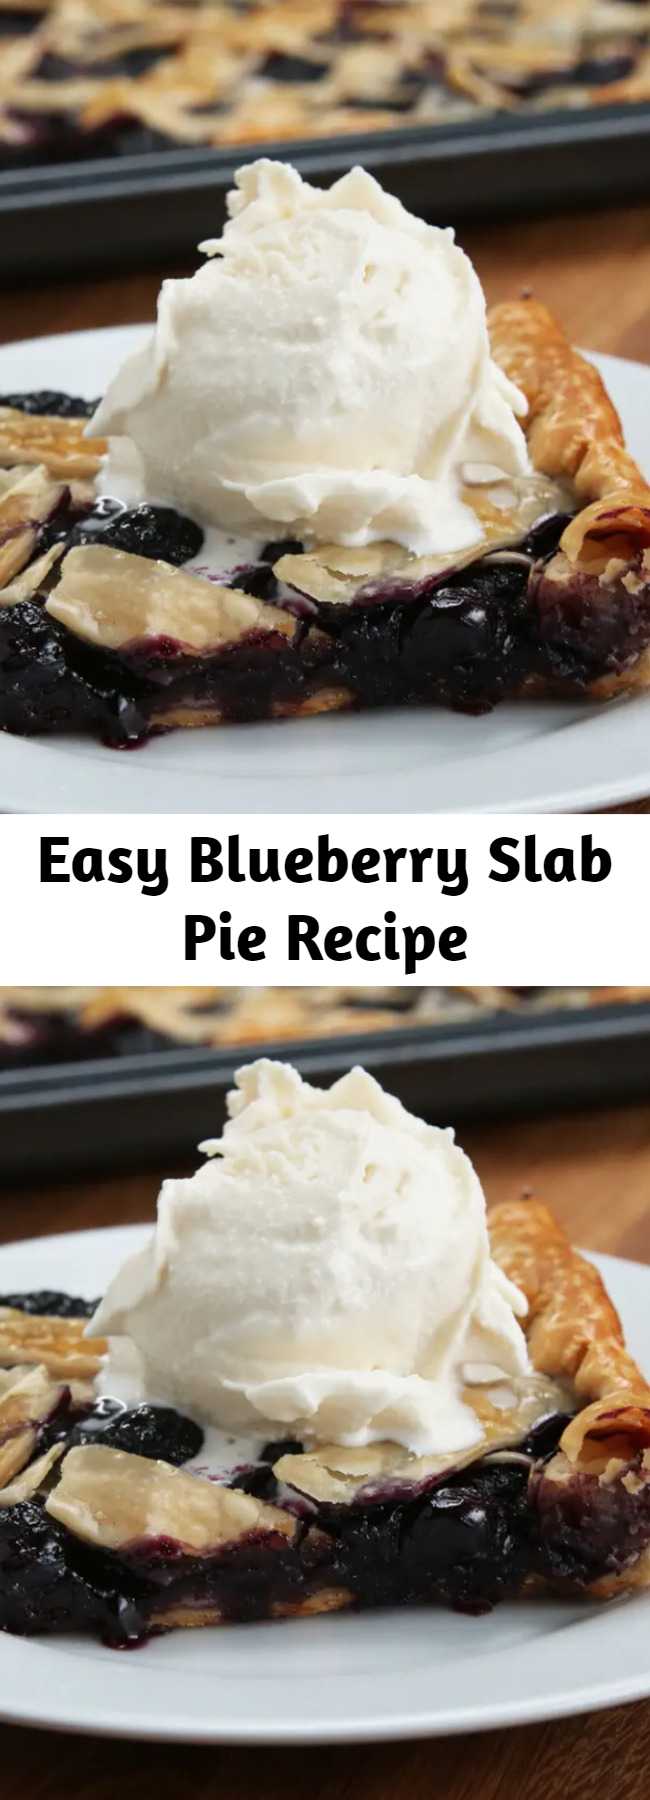 Easy Blueberry Slab Pie Recipe - It looked and tasted great. Highly recommend with whipped cream! Delicious summer dessert!